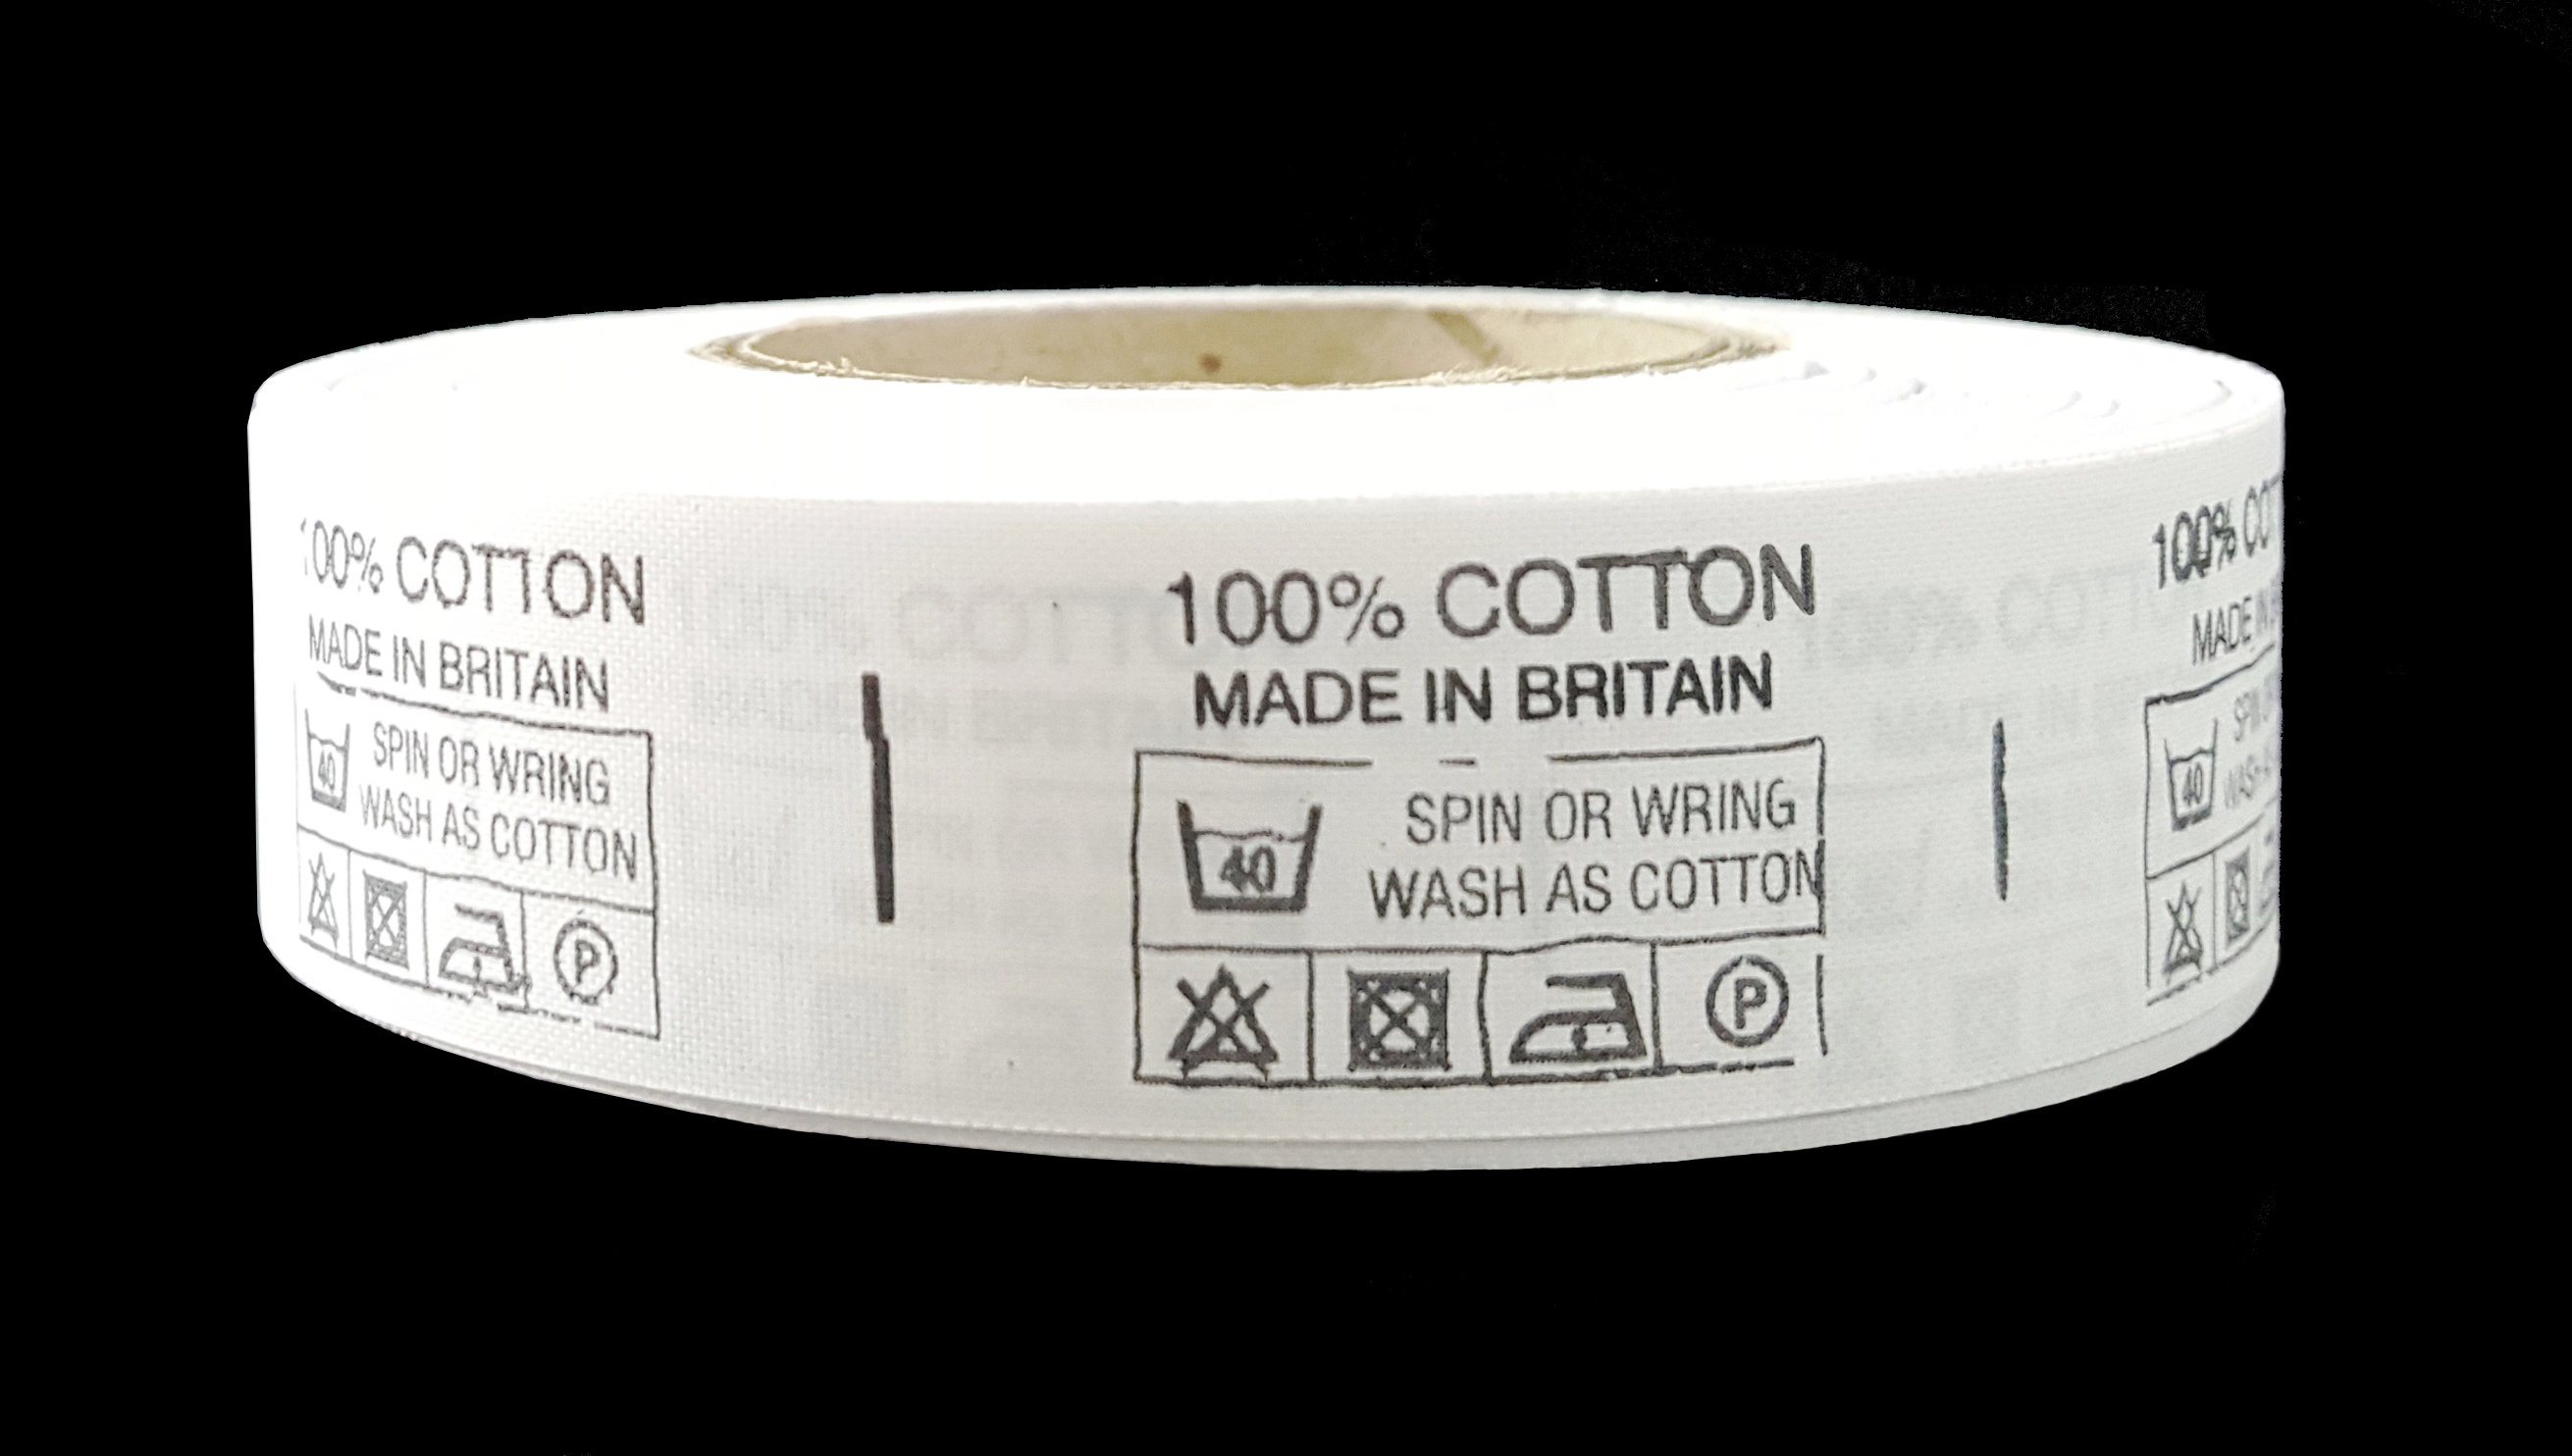 100% Cotton Made In Britain, Care Labels